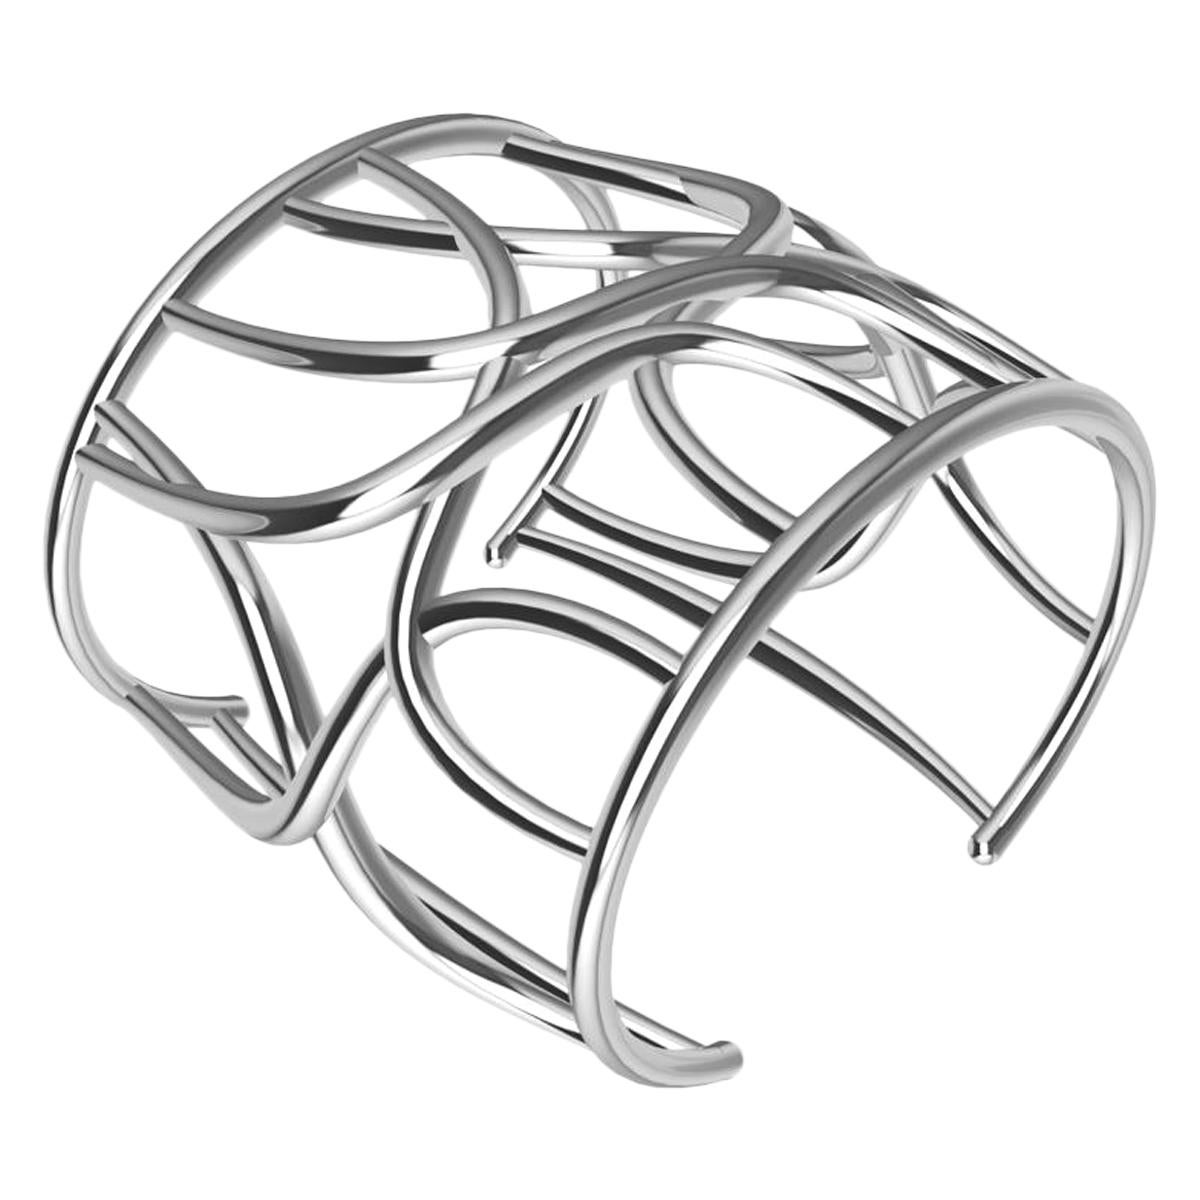 10K White Gold Cuff Bracelet, October the best month to launch the Octopus Cuff. Calling all ocean lovers. So what Summer's over, you can still create your own waves this winter with this bracelet. Organic lines of waves rolling over your wrist .